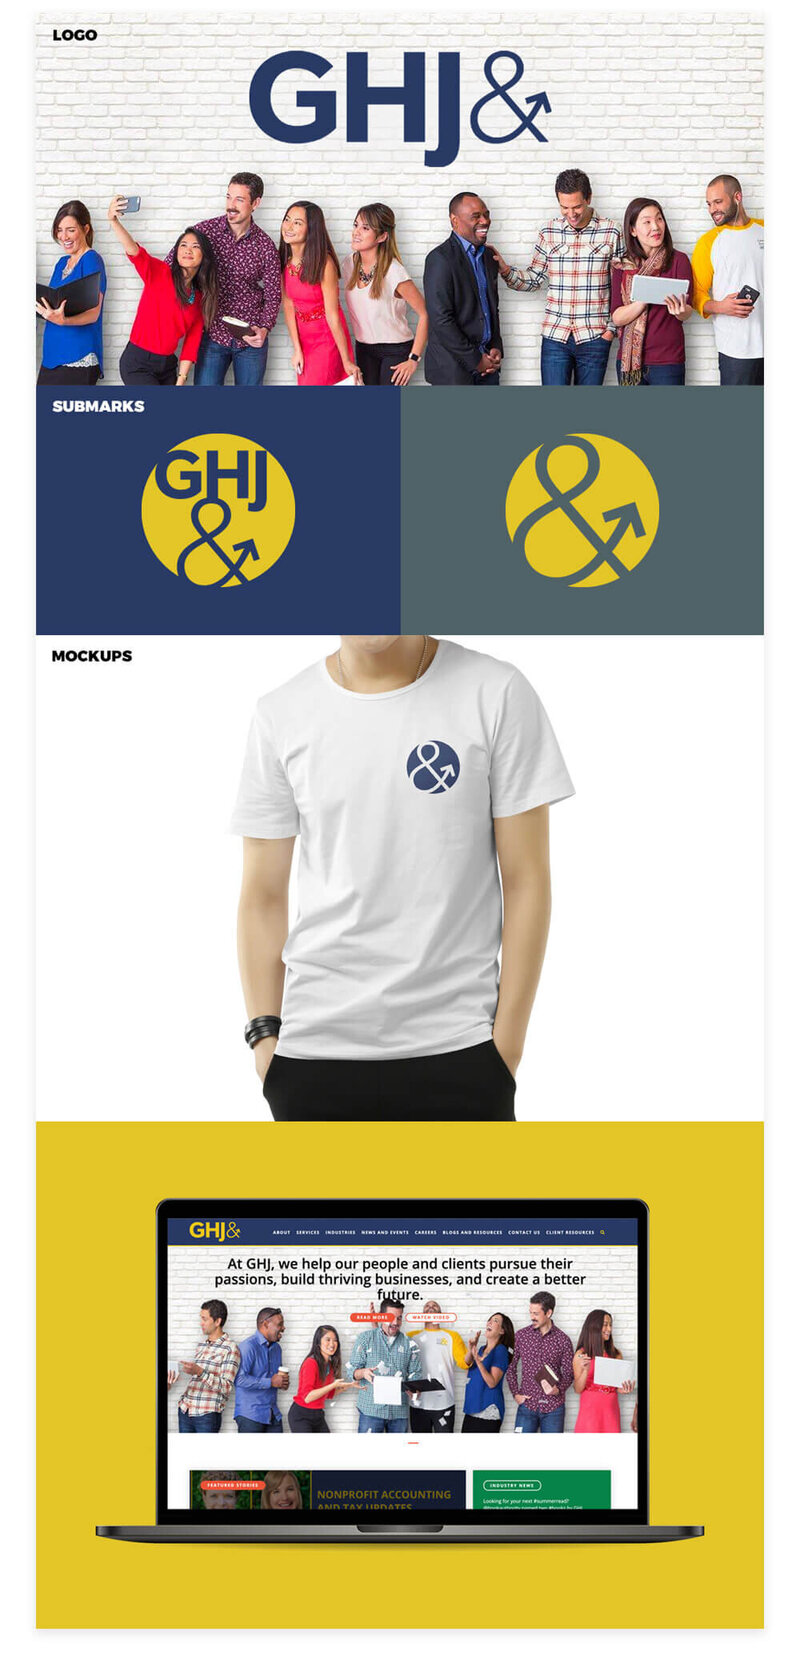 GHJ Custom Logo Design And Brand Design Elements - mockup includes the logo in use, a t-shirt mockup with the logo design on the chest, and a mockup of the website design